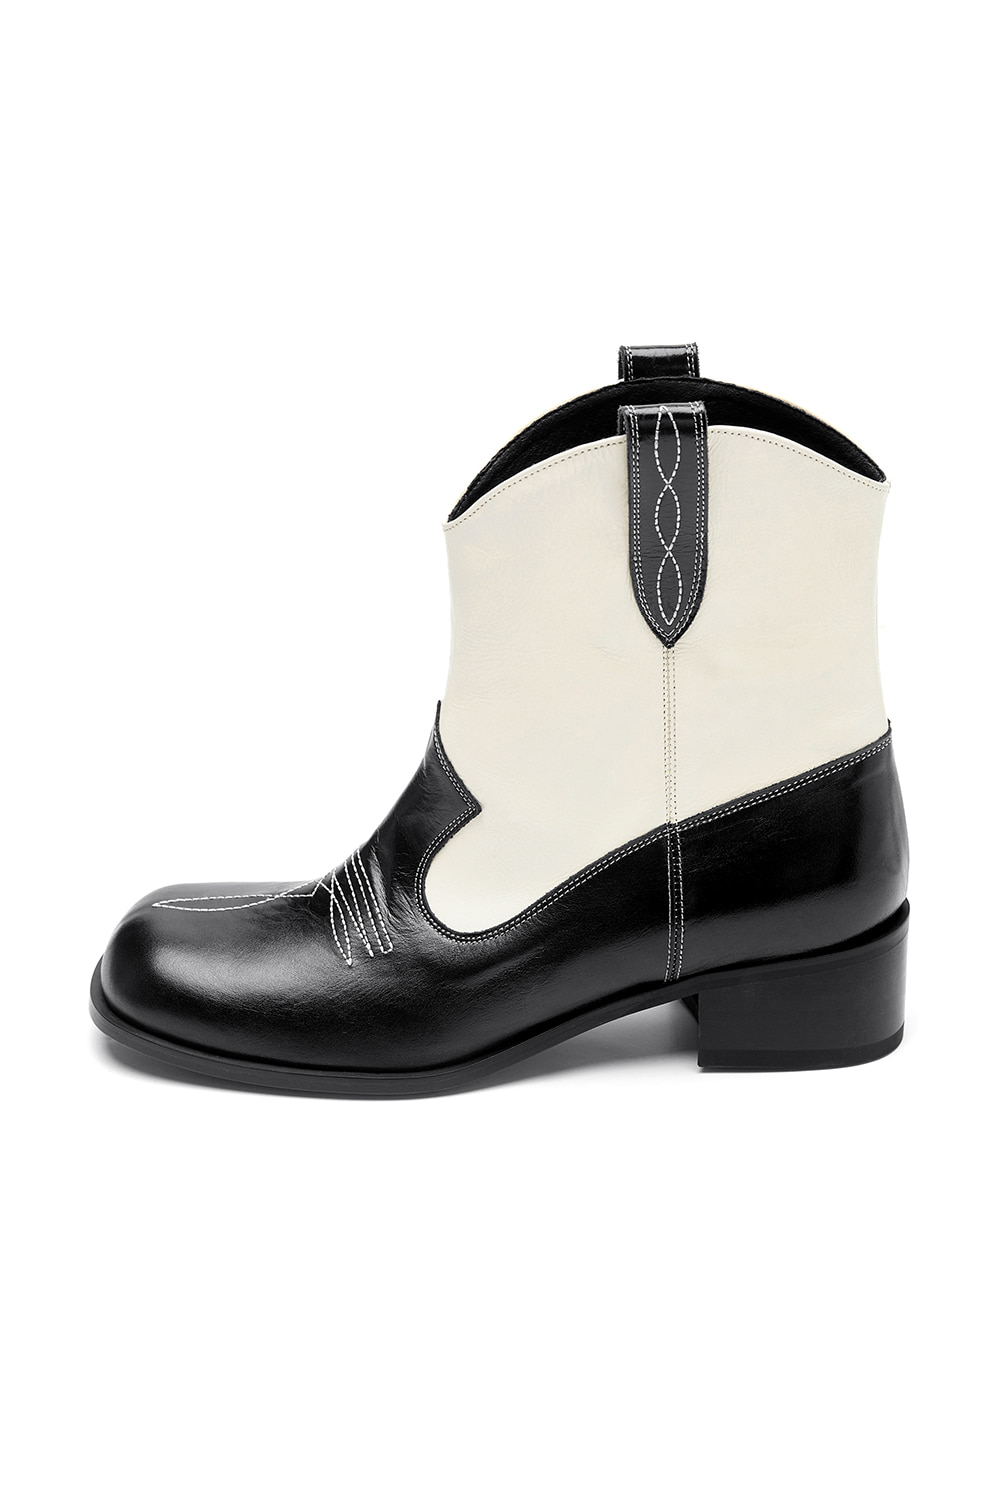 WESTERN ROUND SQUARE TOE MIDDLE BOOTS [BLACK]		